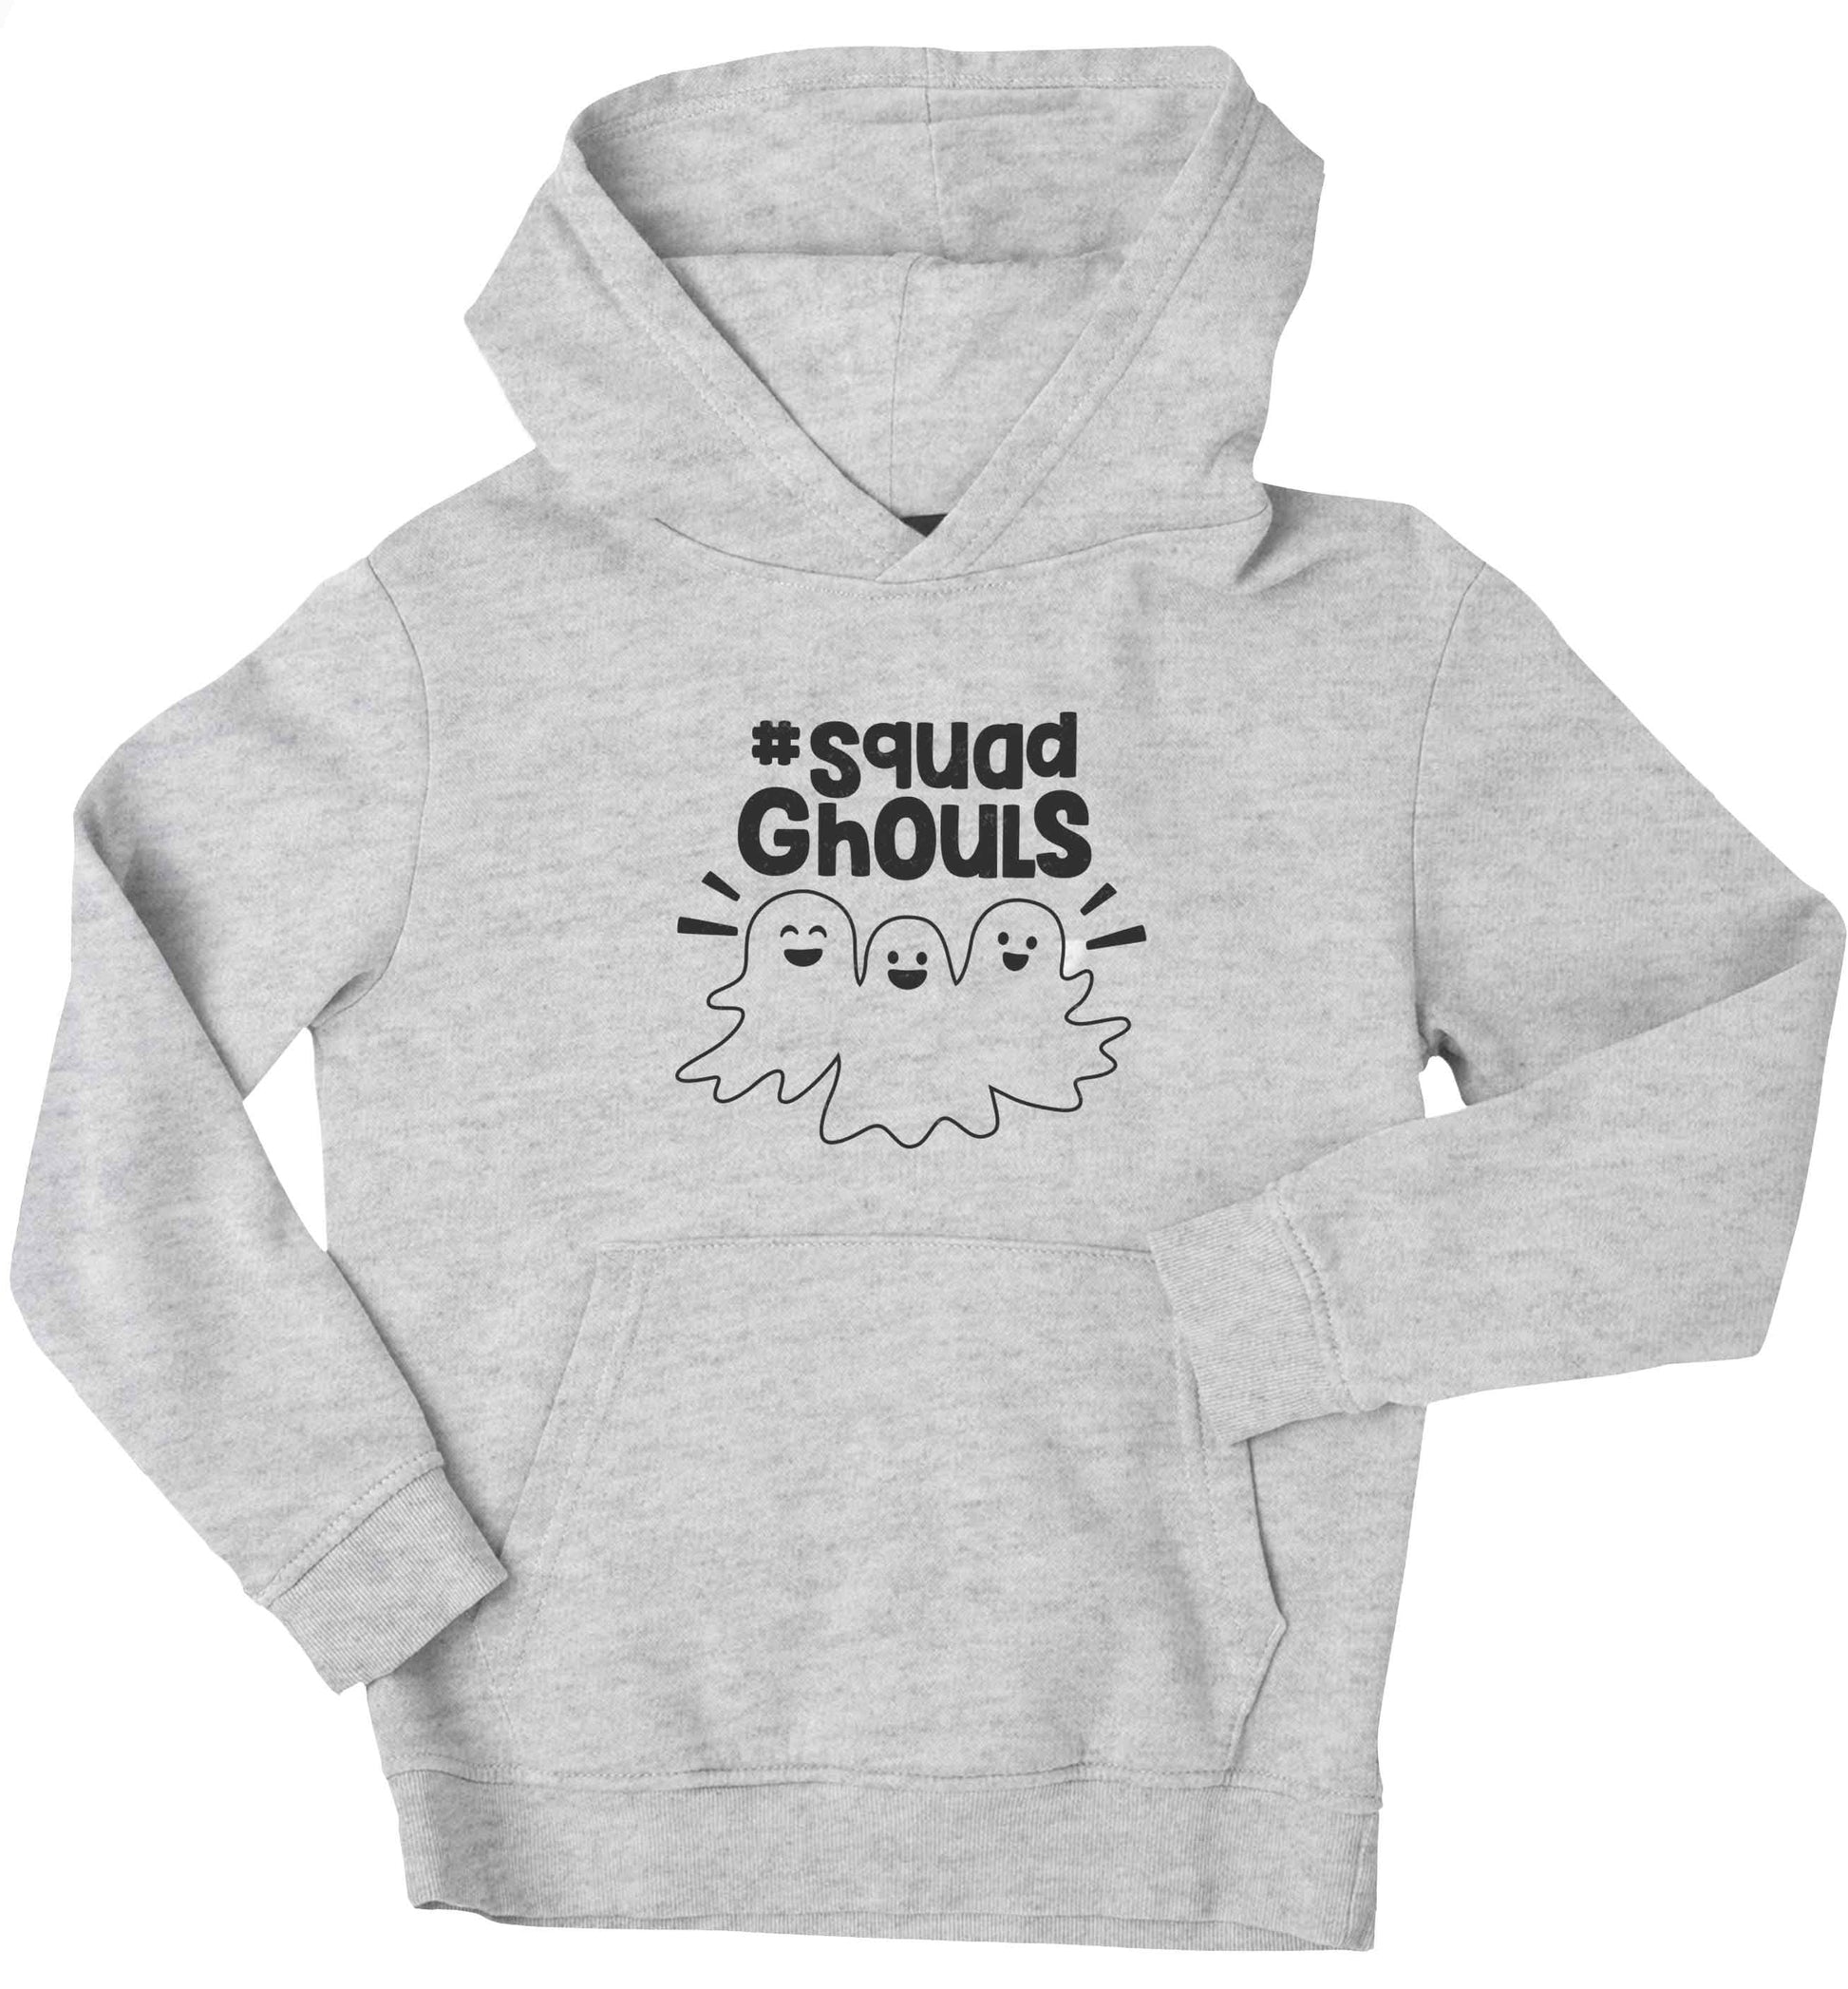 Squad ghouls Kit children's grey hoodie 12-13 Years